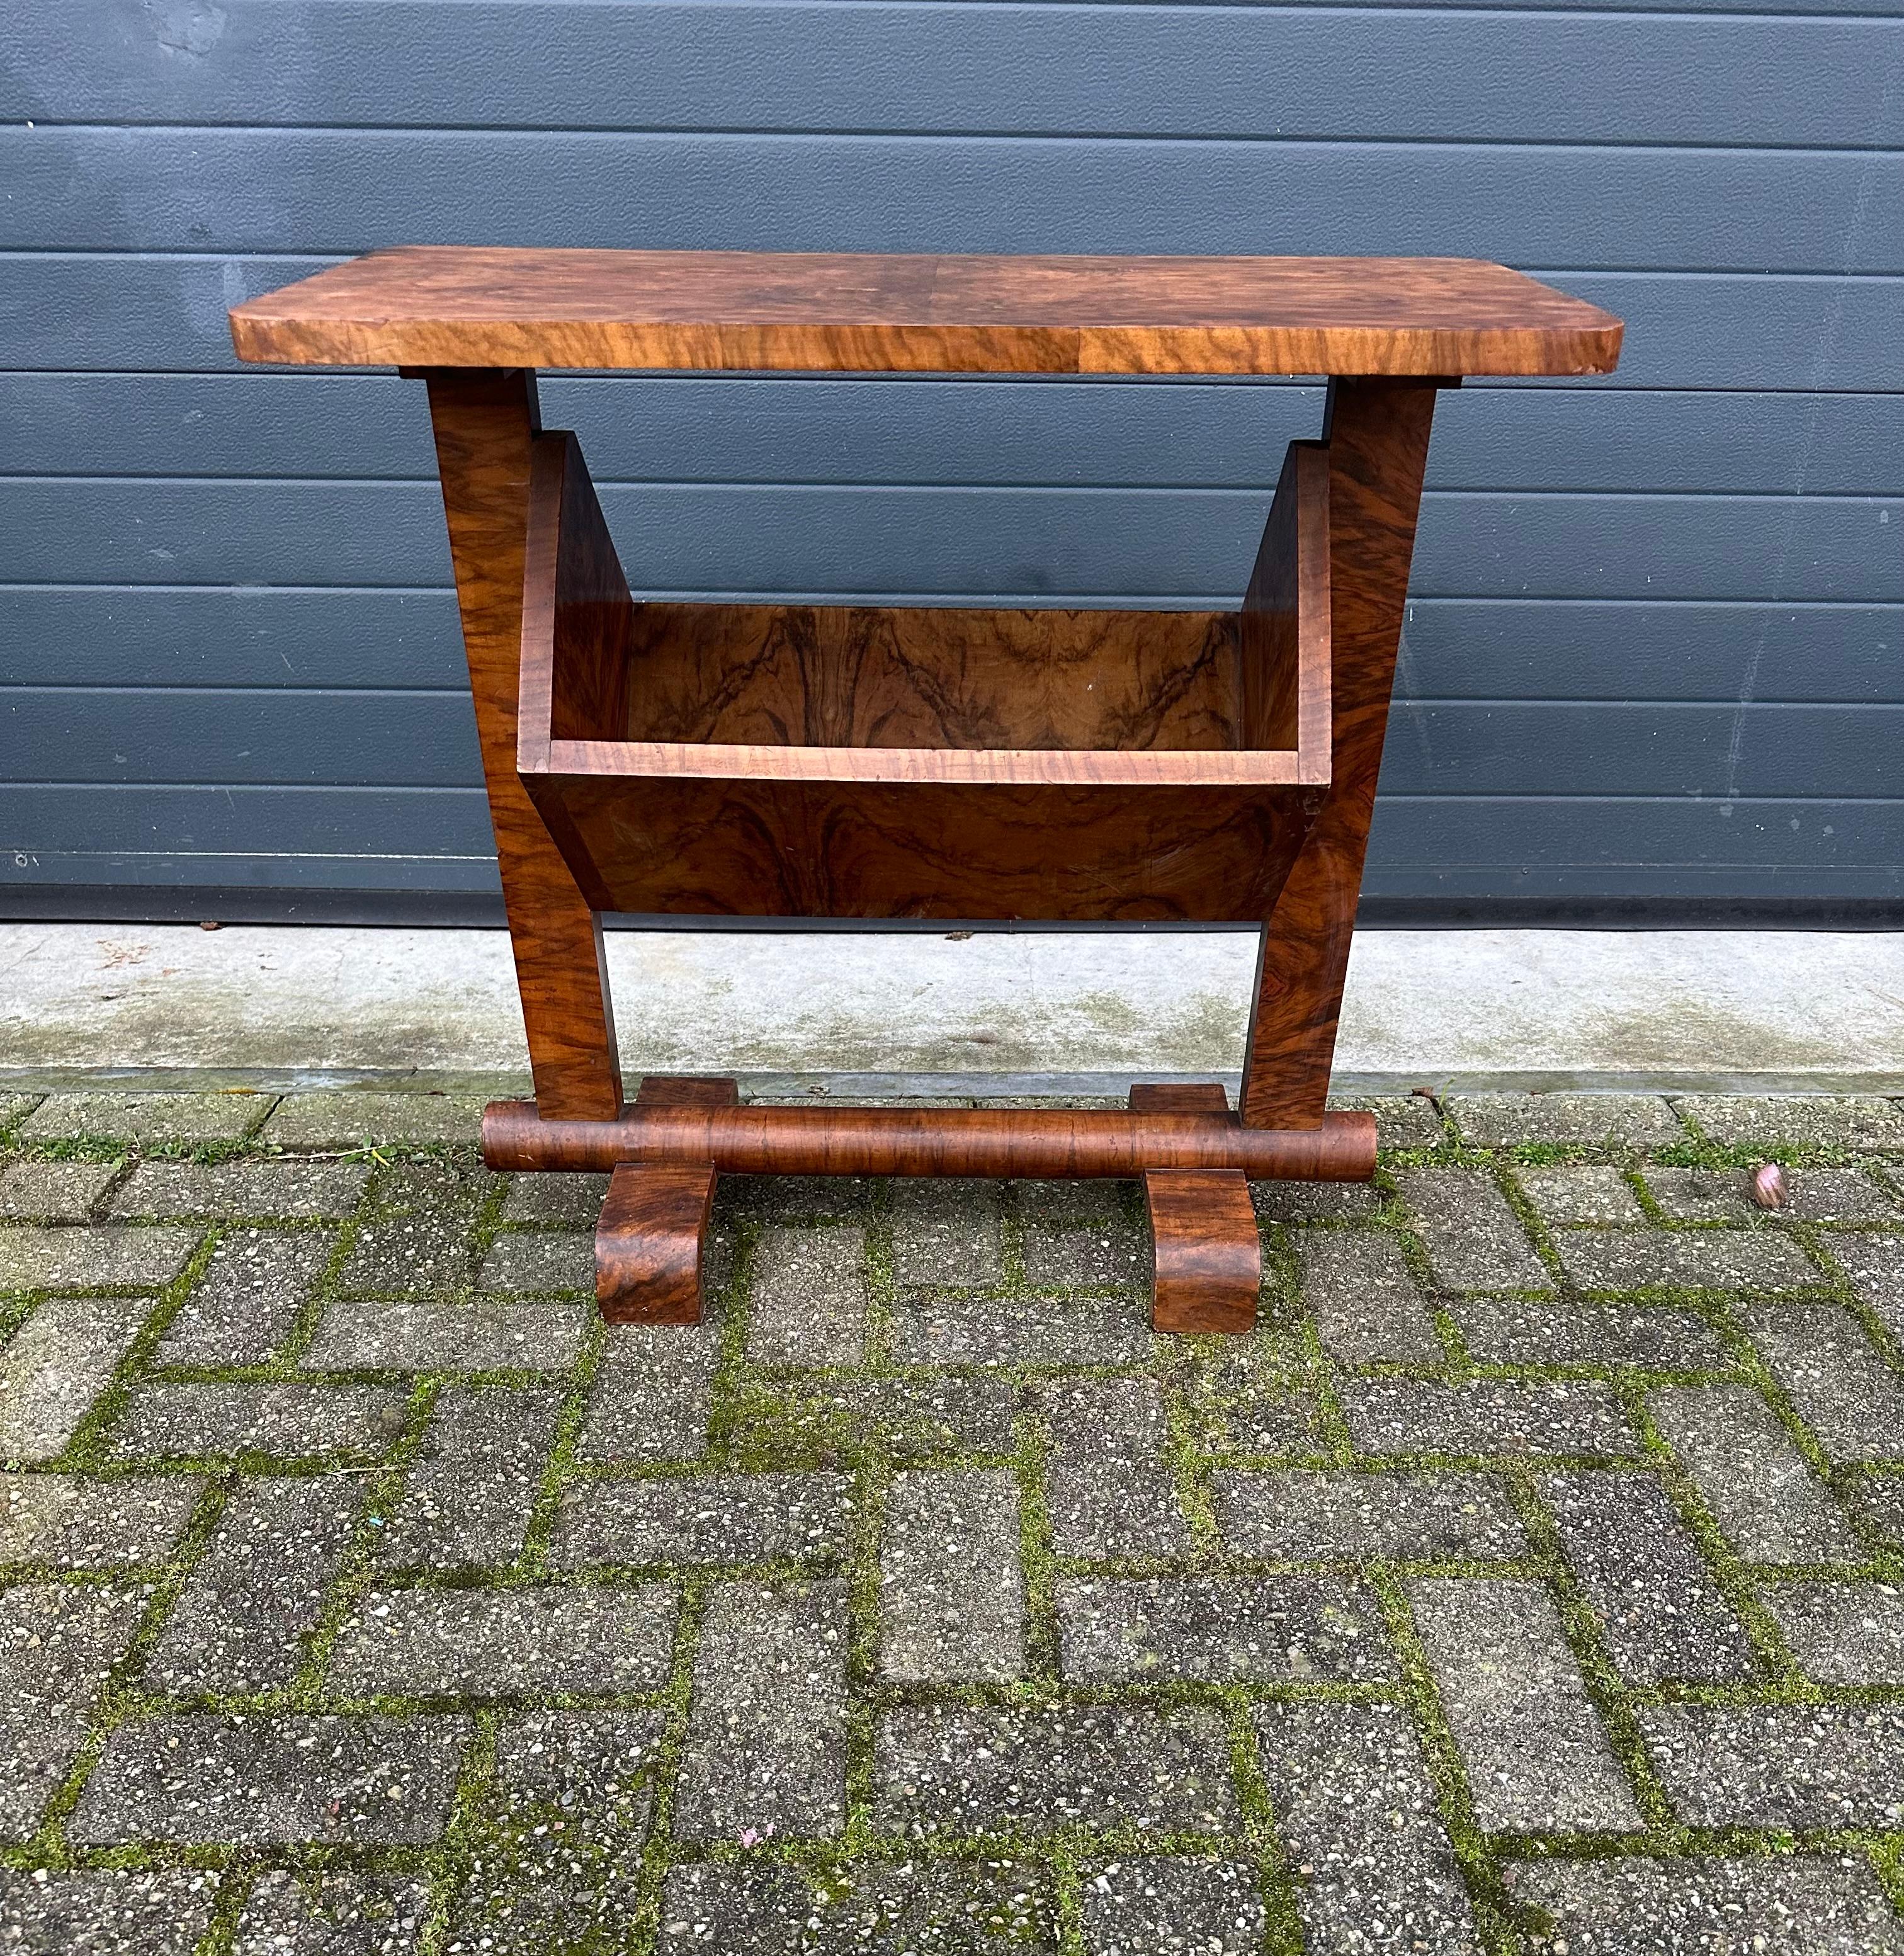 Rare and practical Art Deco books table, made of very beautiful burl walnut veneer.

This stylish and possibly unique Art Deco table and bookcase into one could be the perfect finish to a small area for reading, rest and relaxation. However, this